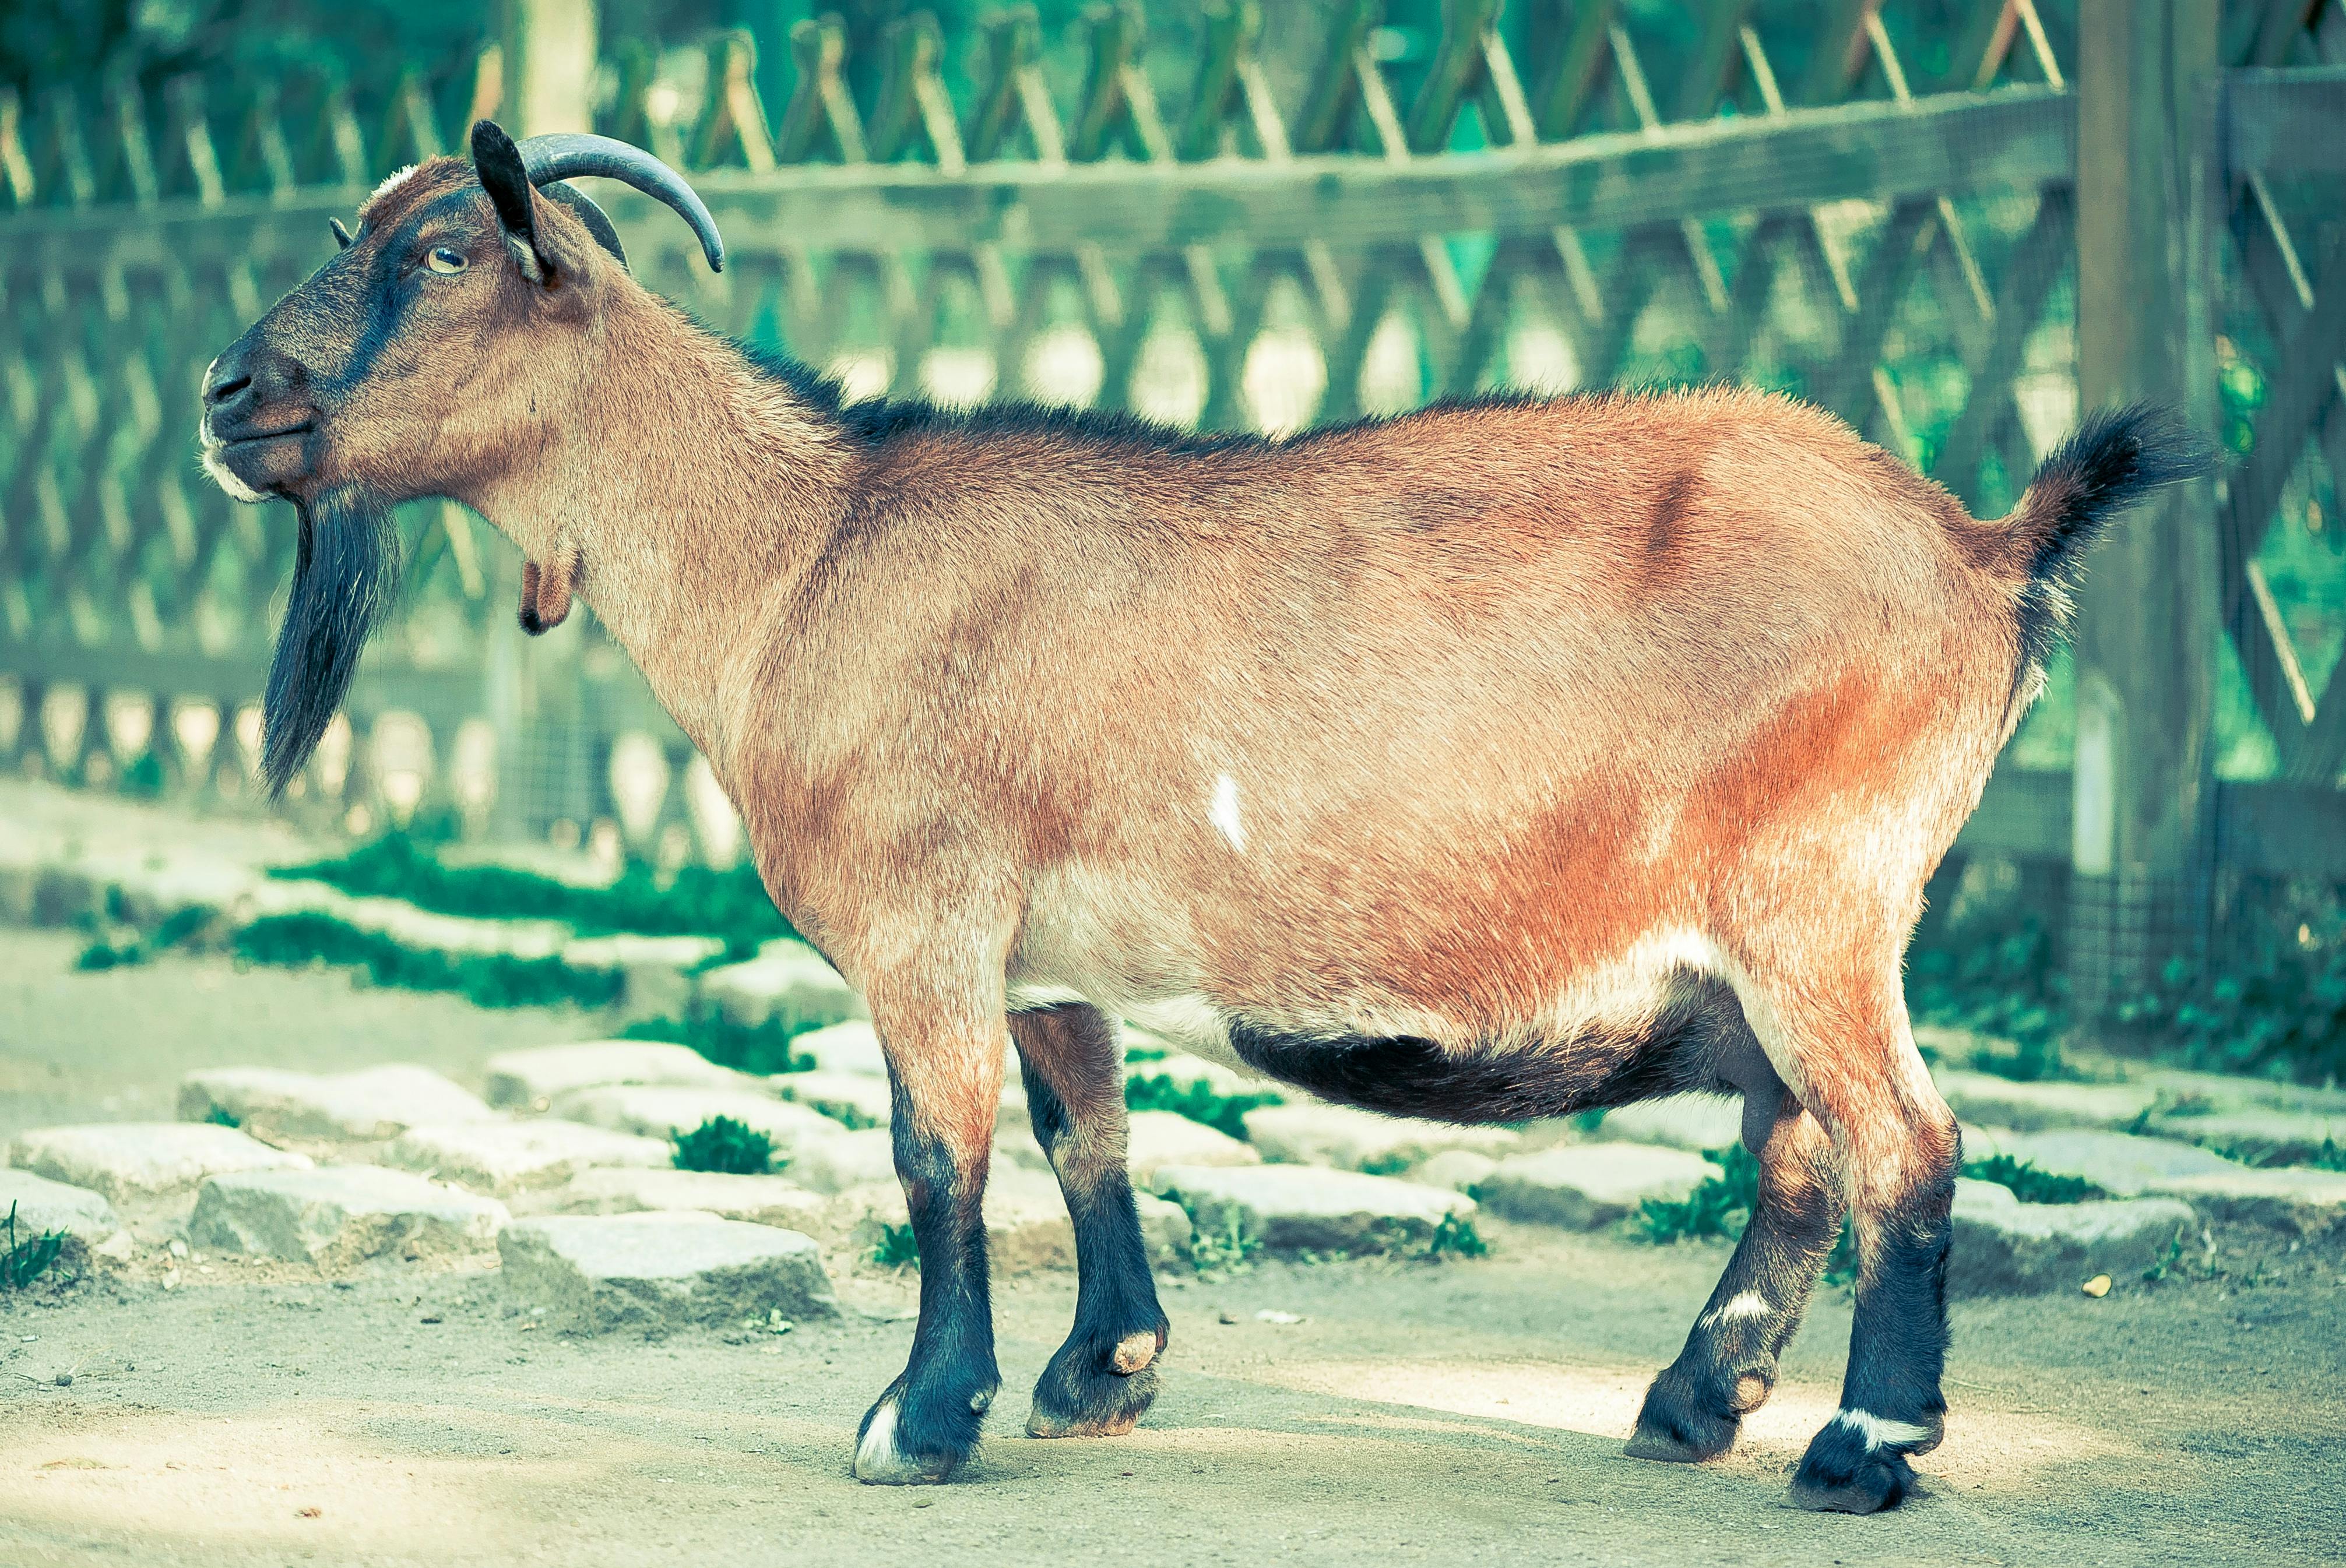 brown-and-black-goat-with-horn-standing-near-fence-free-stock-photo